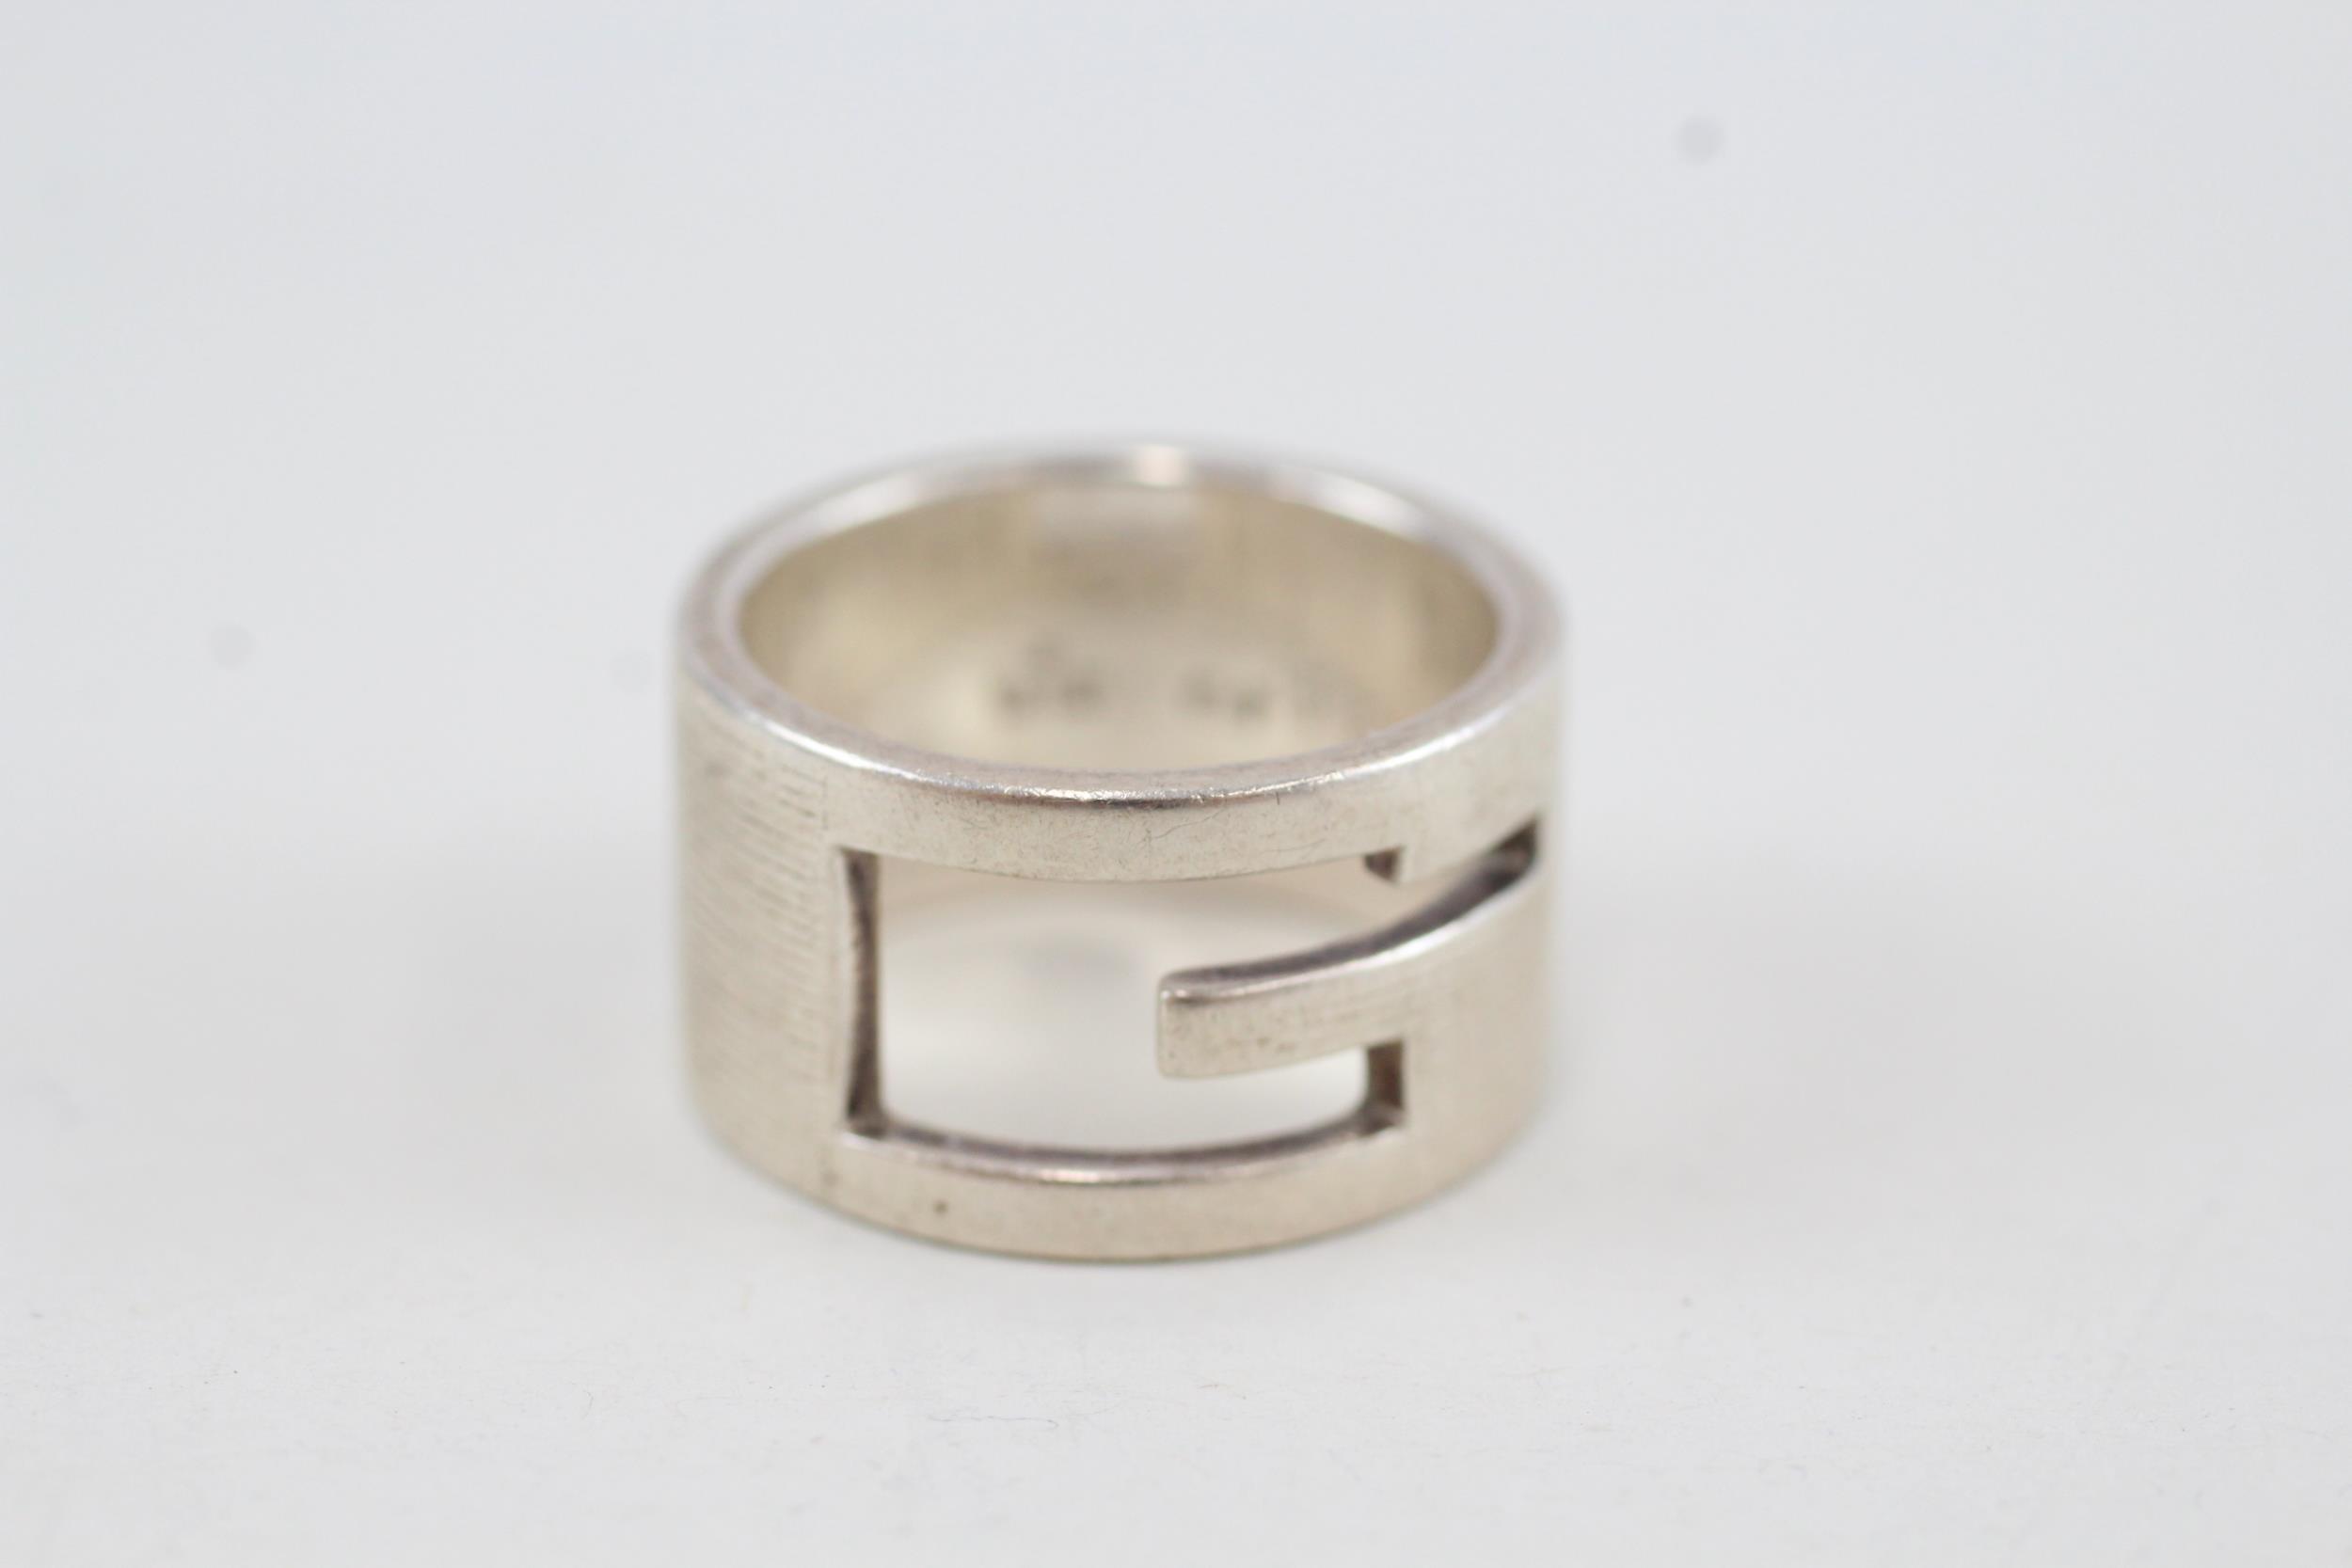 Gucci sterling silver G cutout statement ring (14g) Size O